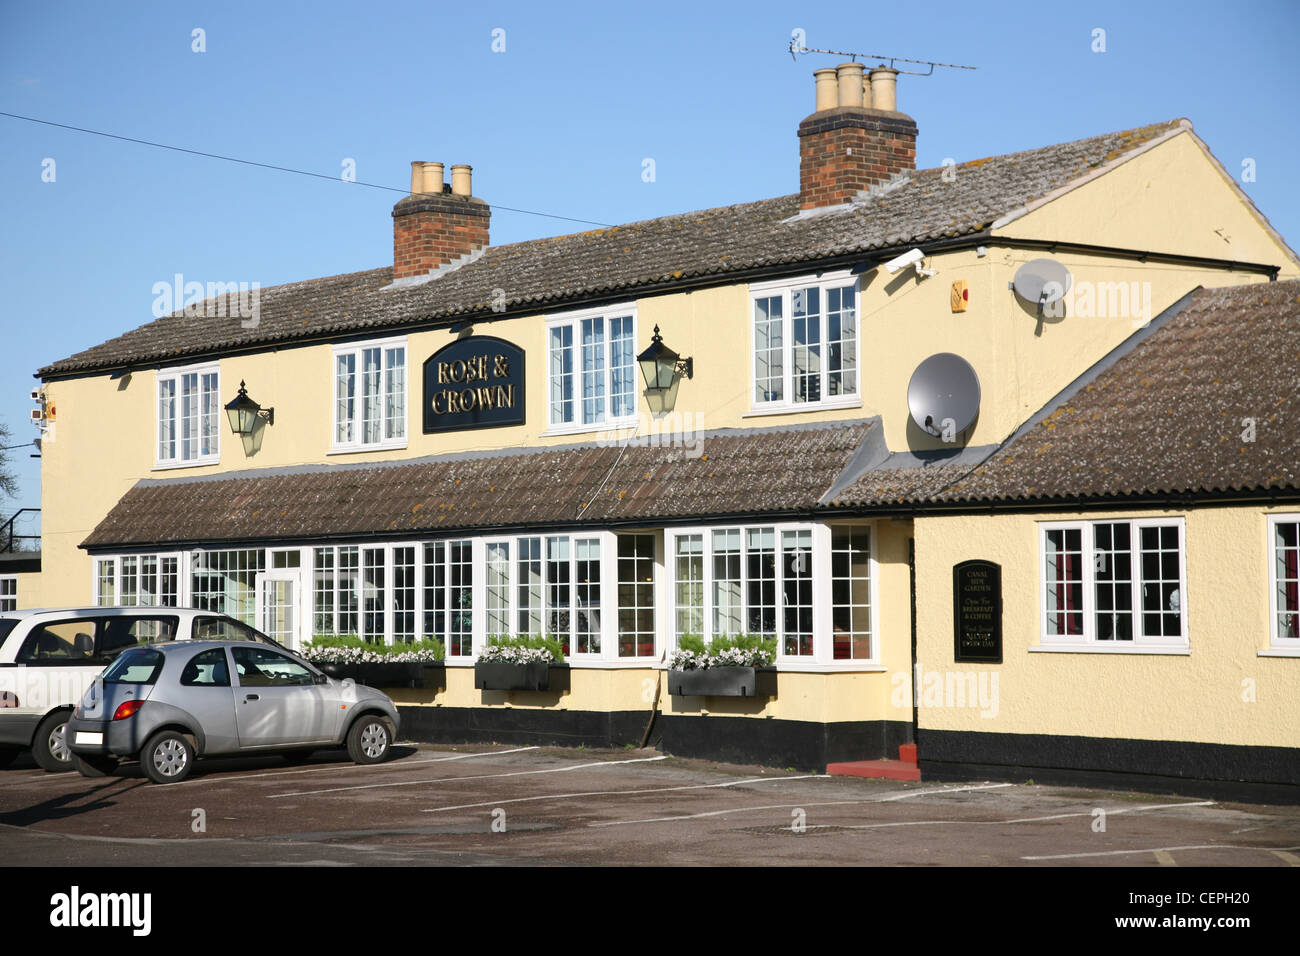 rose & crown public house in zouch nottinghamshire Stock Photo